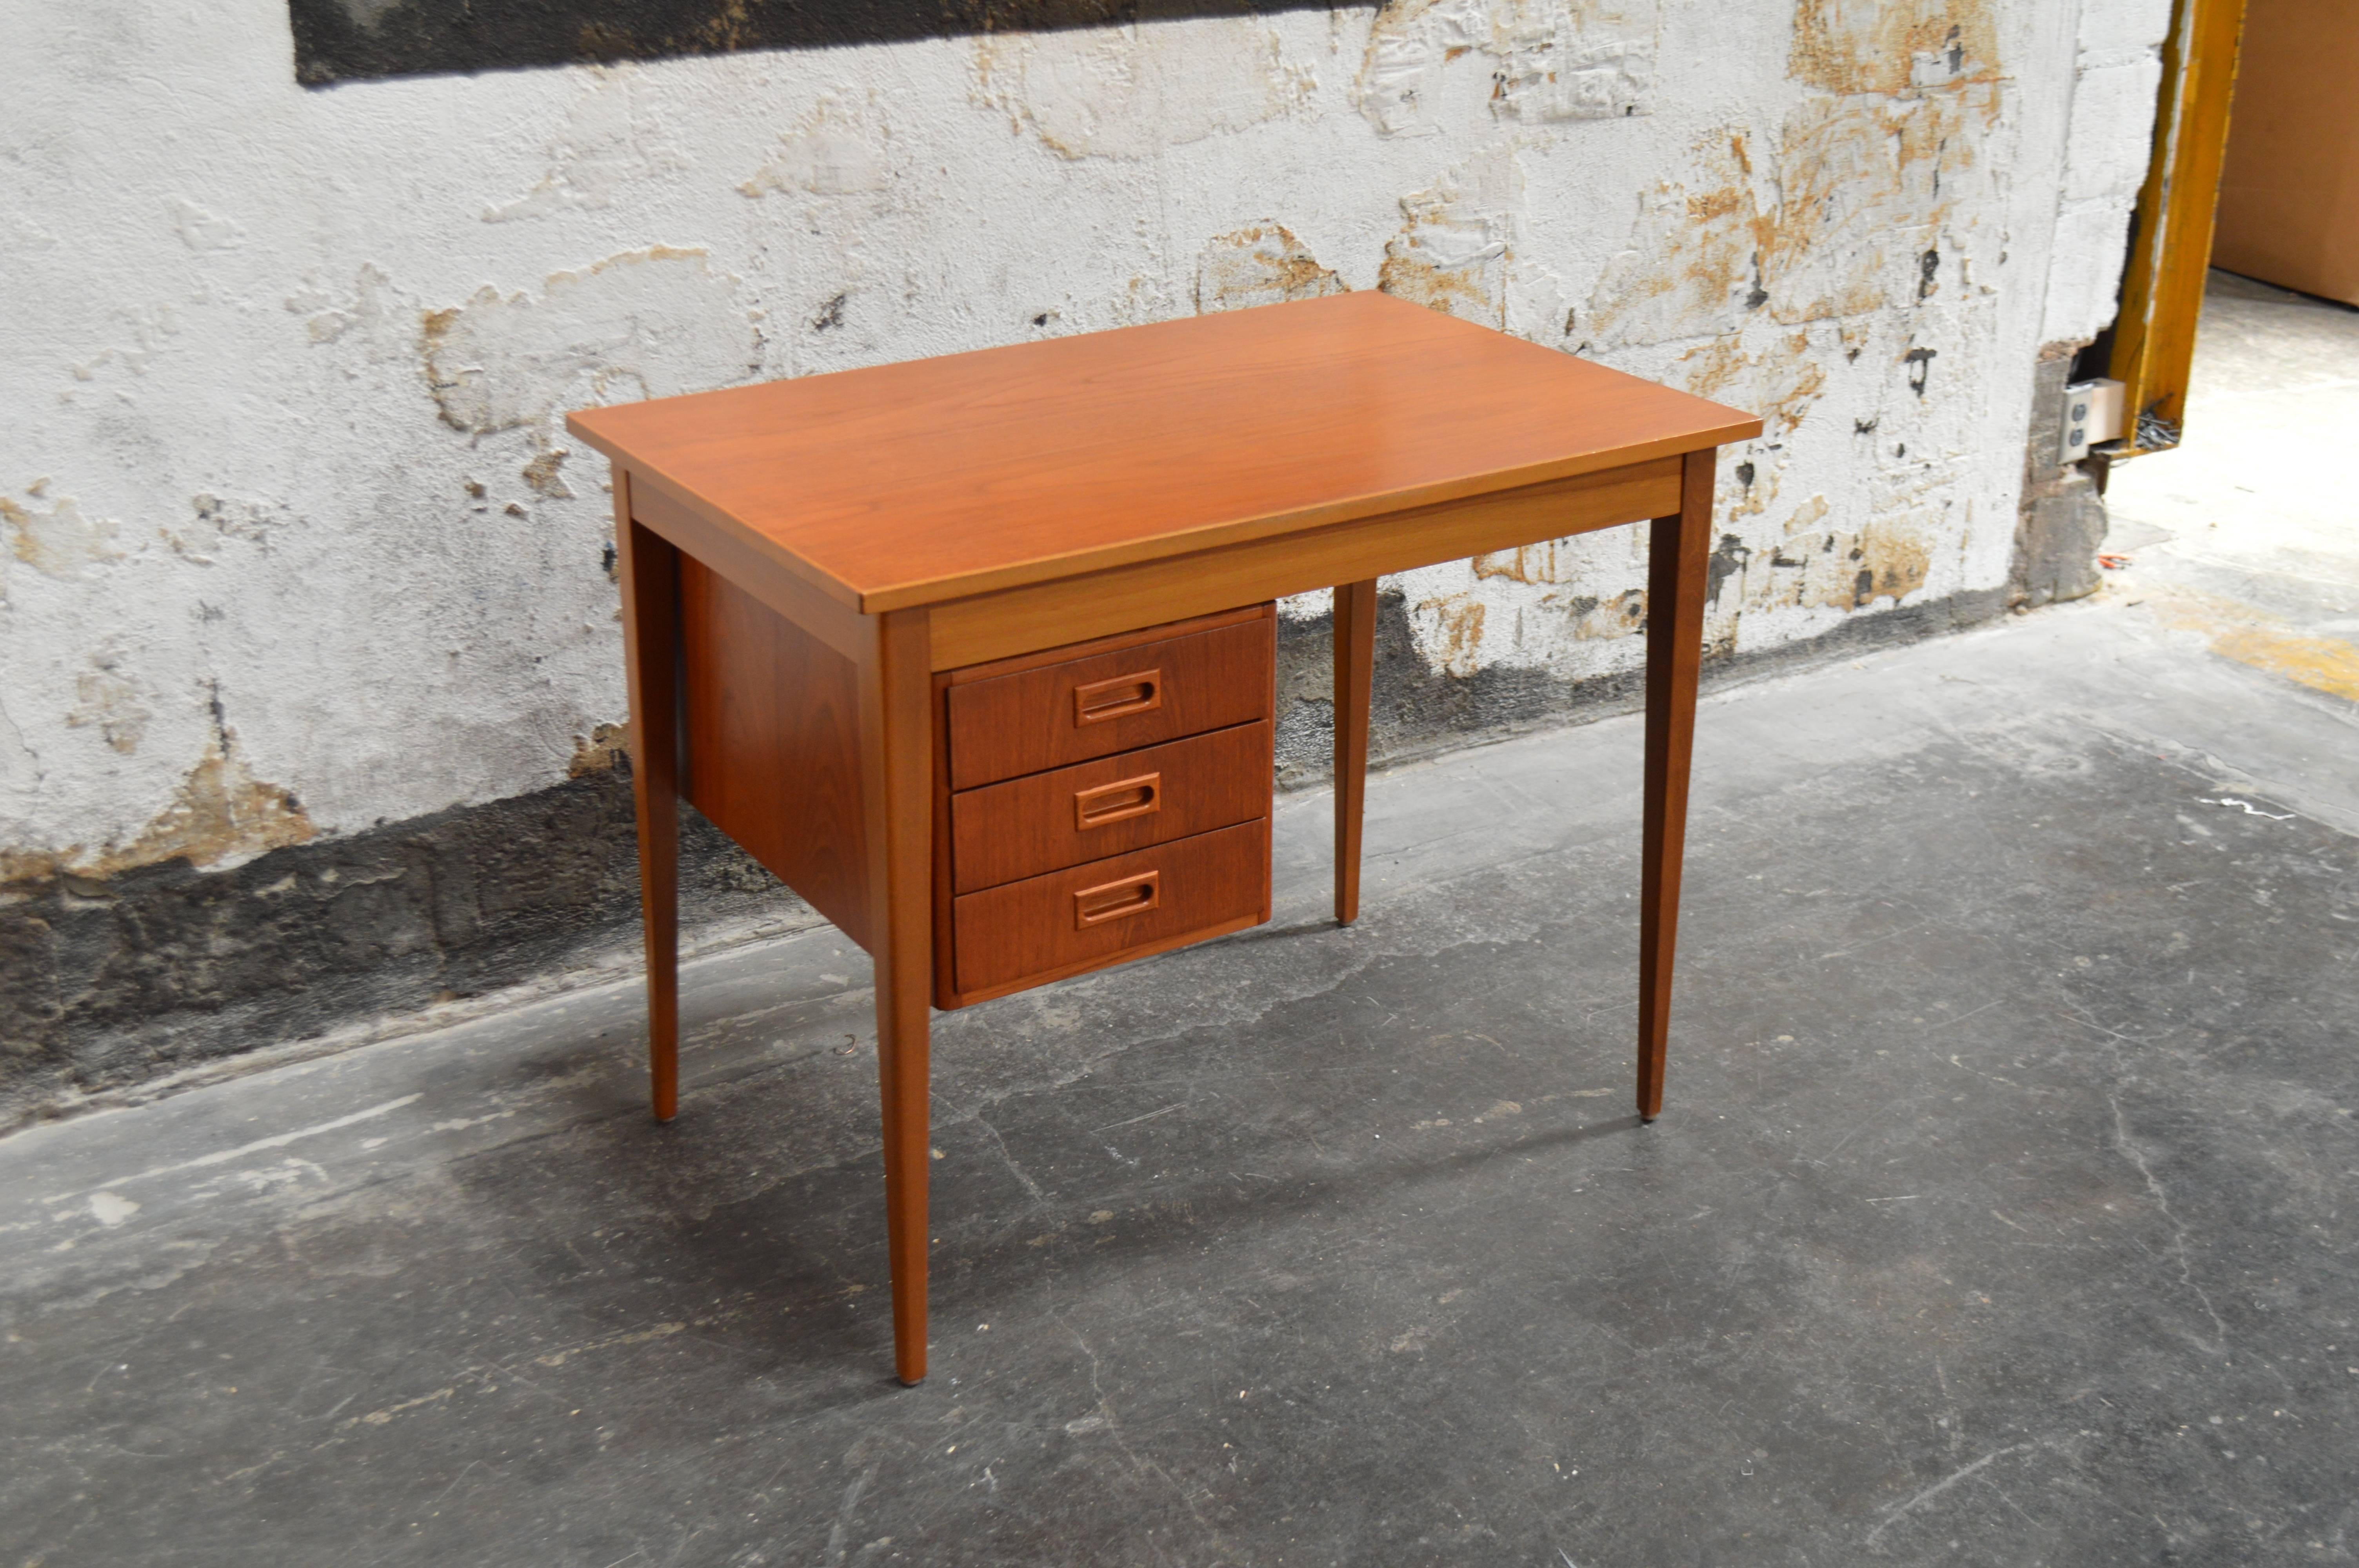 Handsome Mid-Century teak desk in the manner of Arne Vodder. Three drawers that easily slide from side to side sitting atop nicely tapered legs.